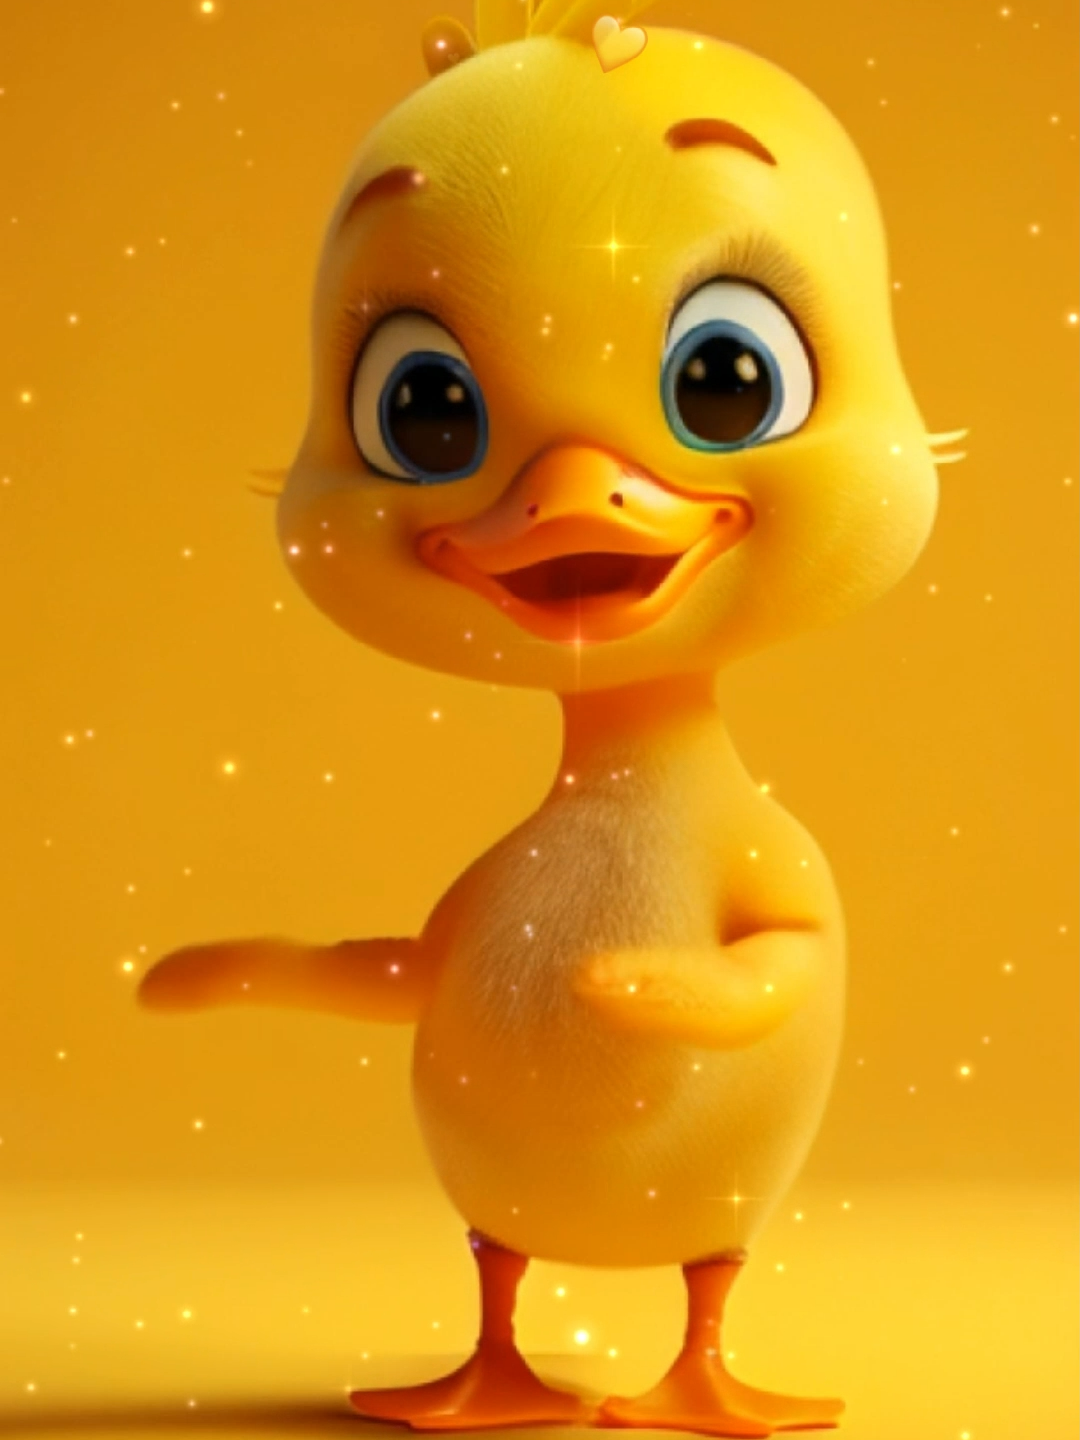 Have a nice day with cute dance by baby ducks #kids #kidsoftiktok #chickendance #chickendancechallenge #chickendancesong #funnykids #kidssong #funnydance #duckdance #duck #fyp #forkids #foryou #funnyfunnytv